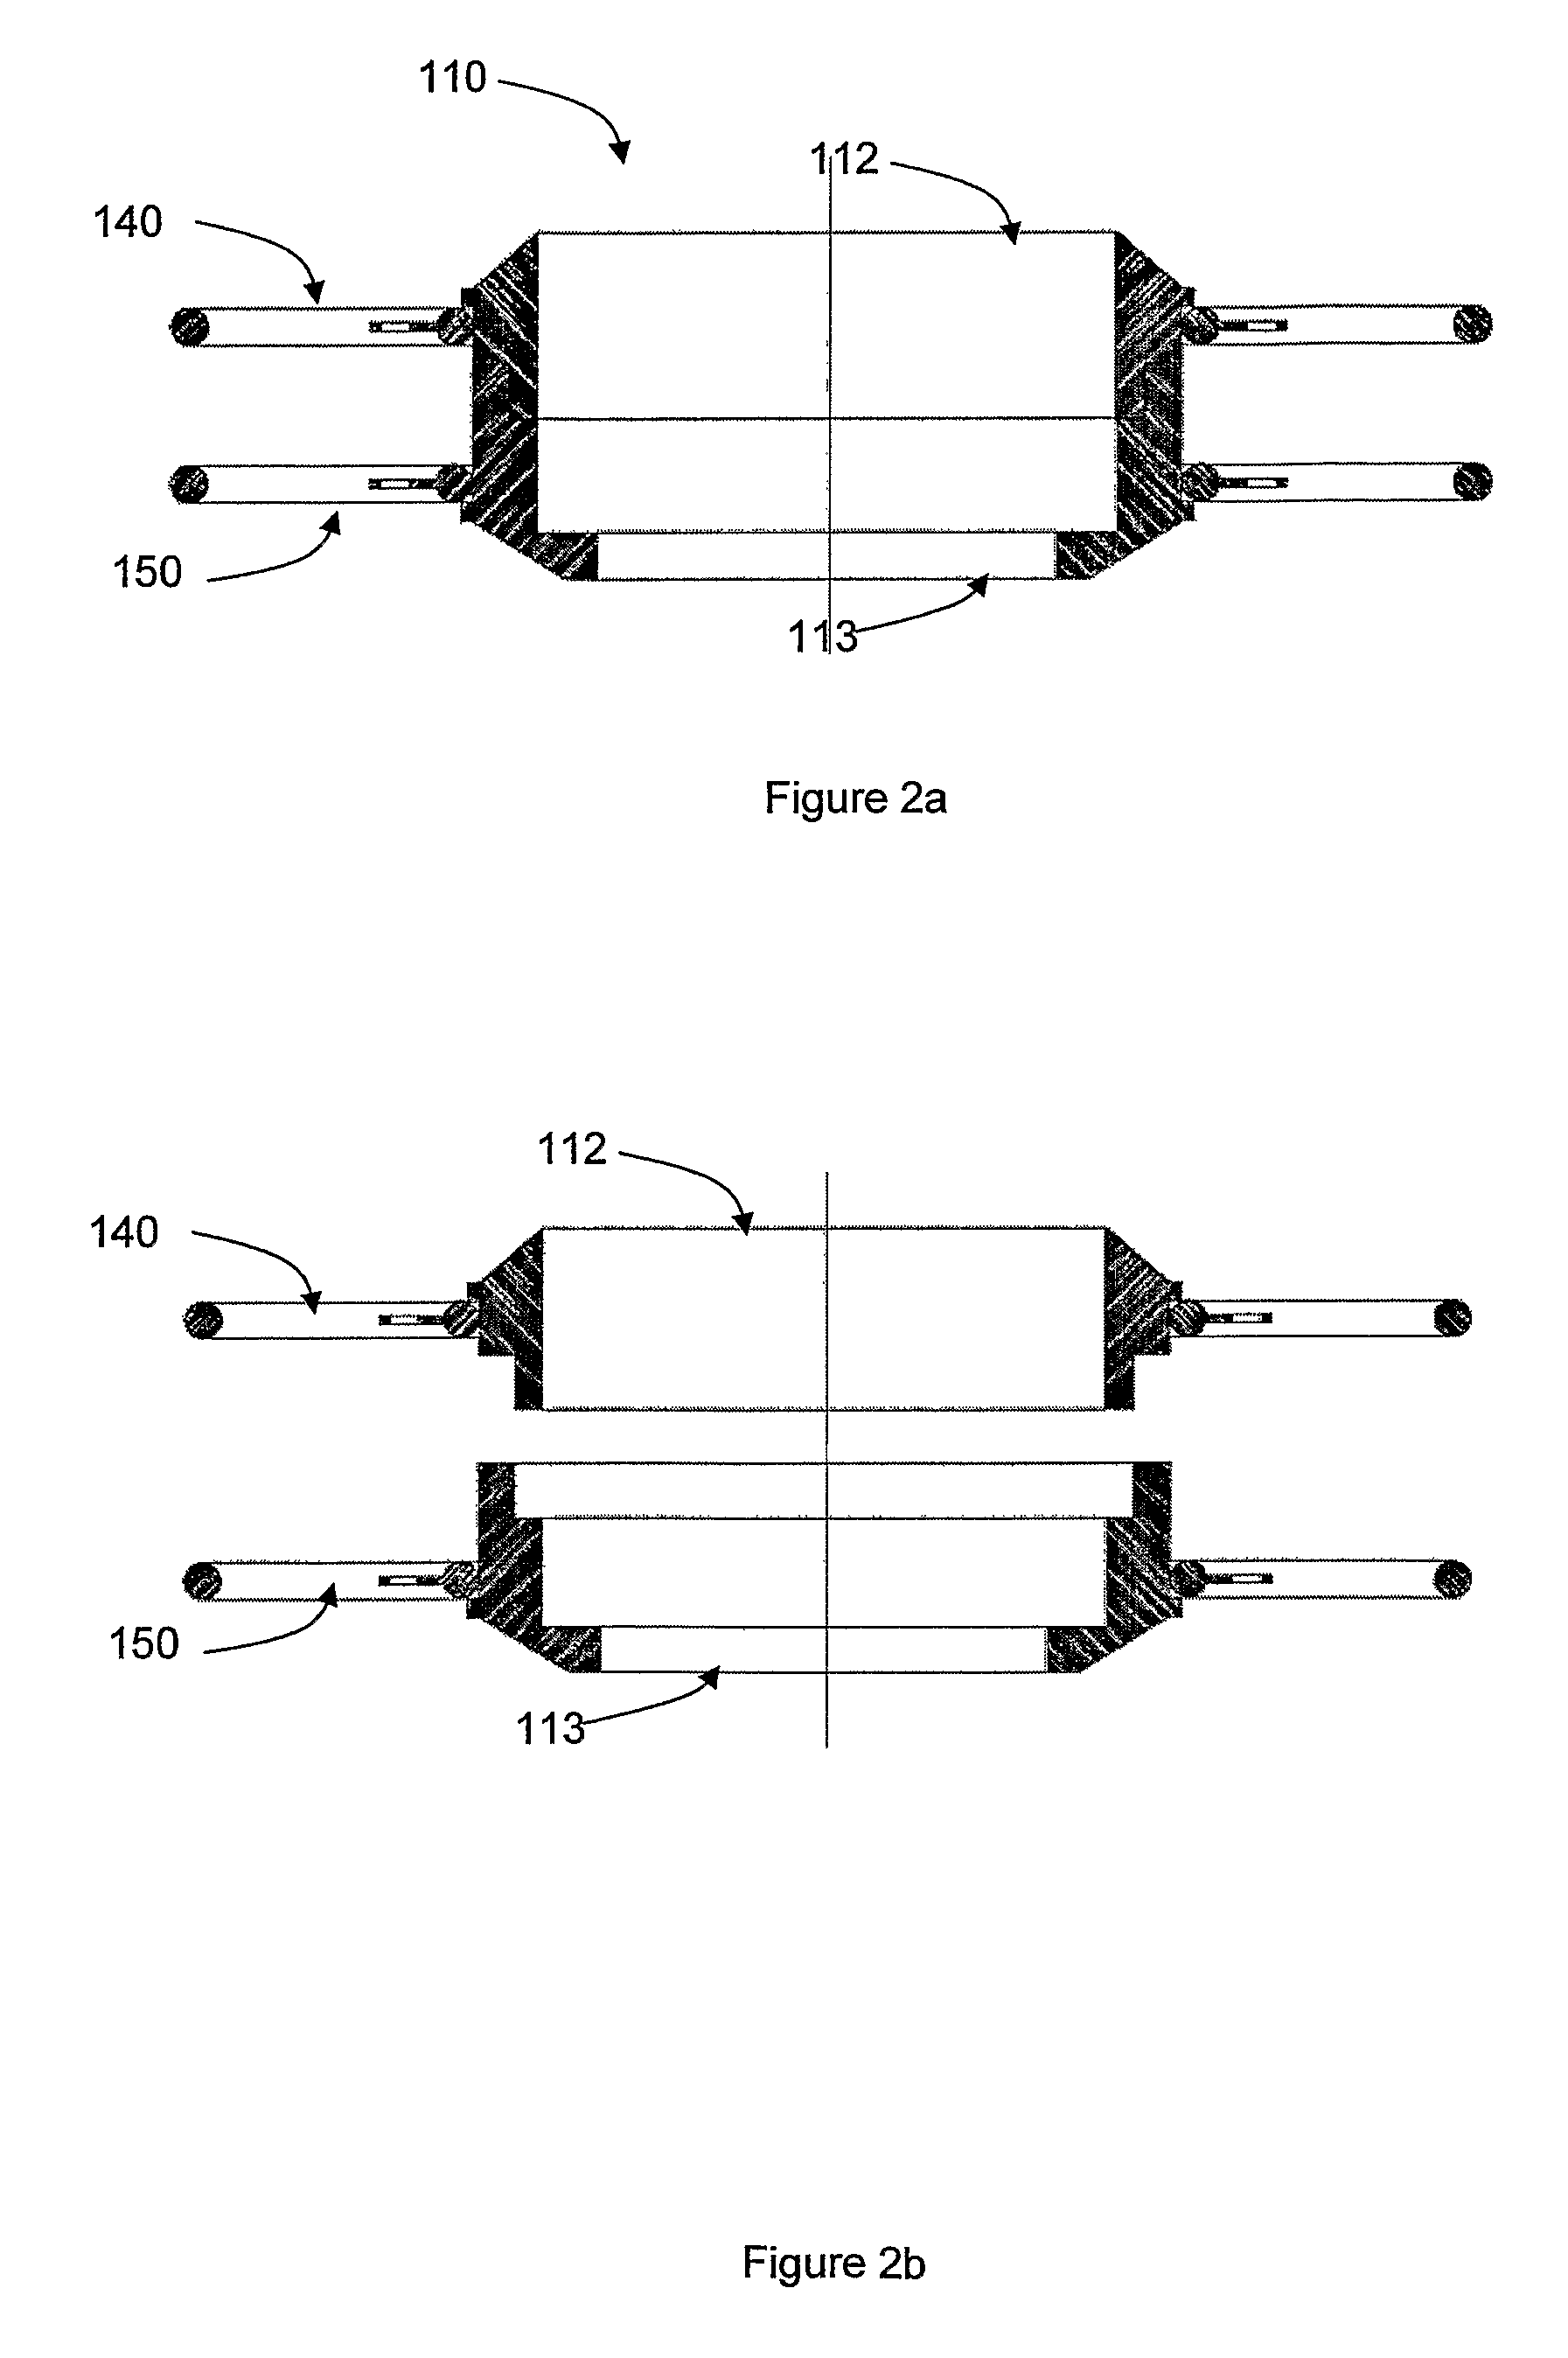 Constriction device for male organ to obviate erectile dysfunction